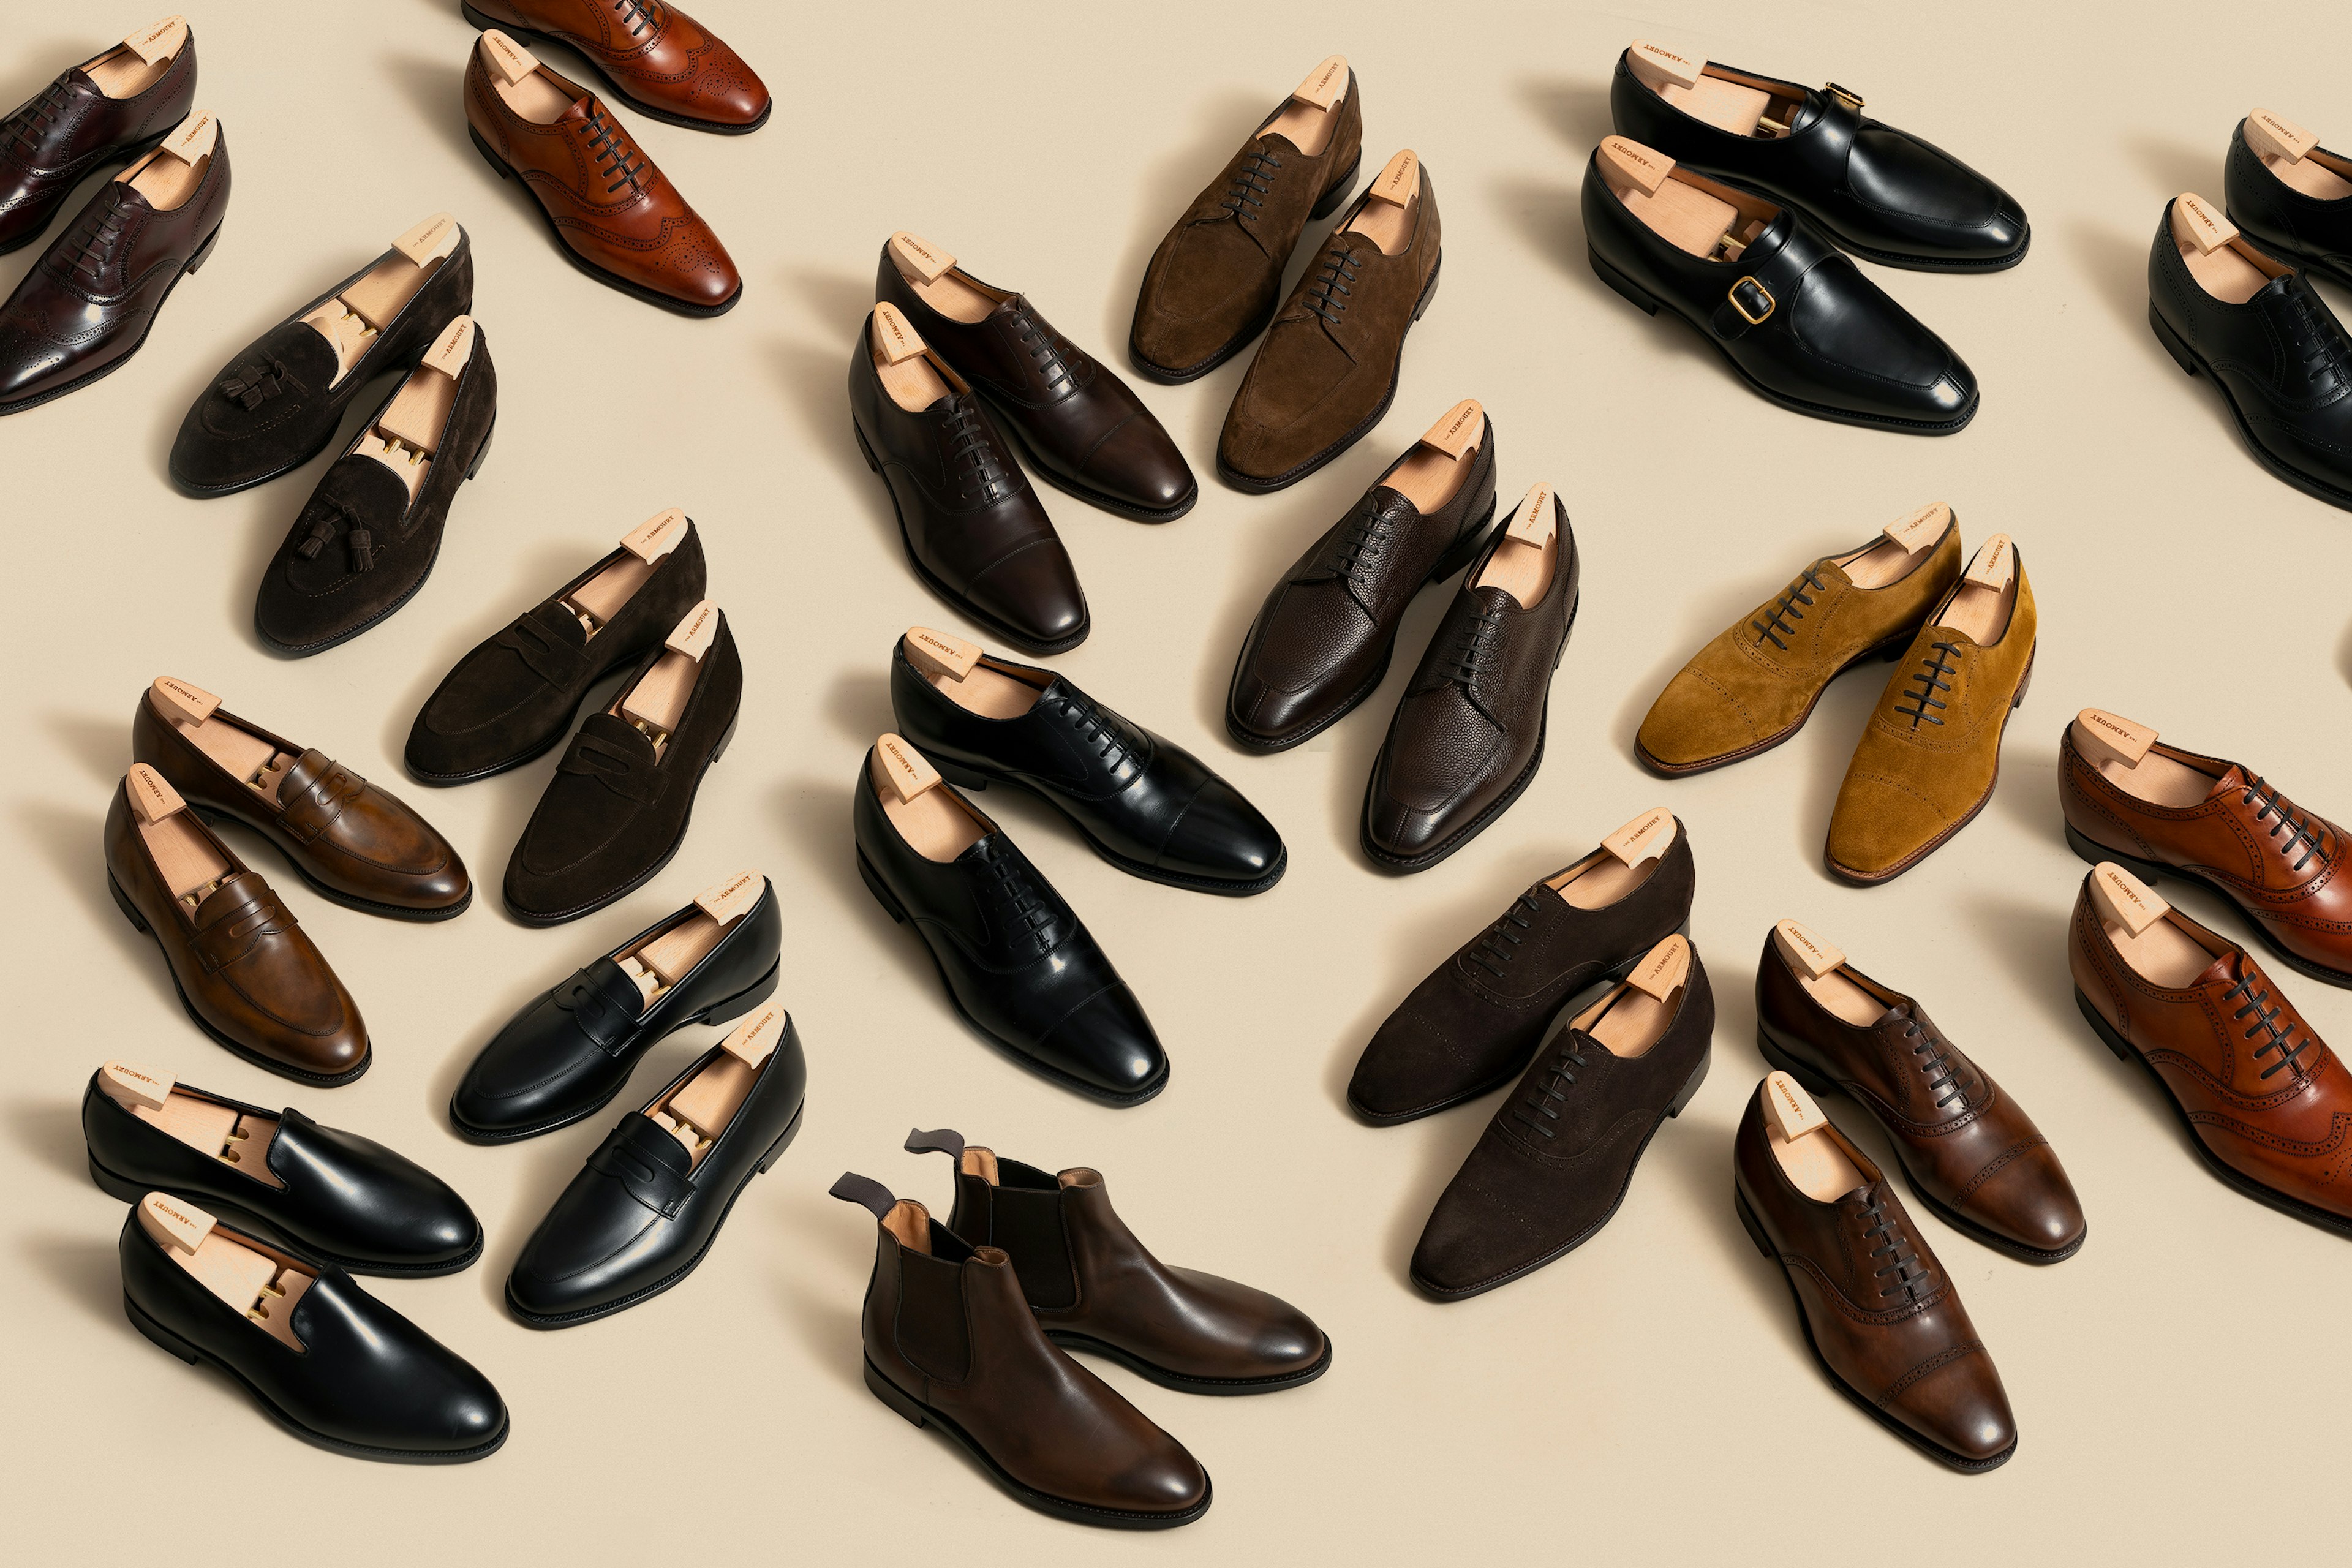 The Armoury Shoe Collection